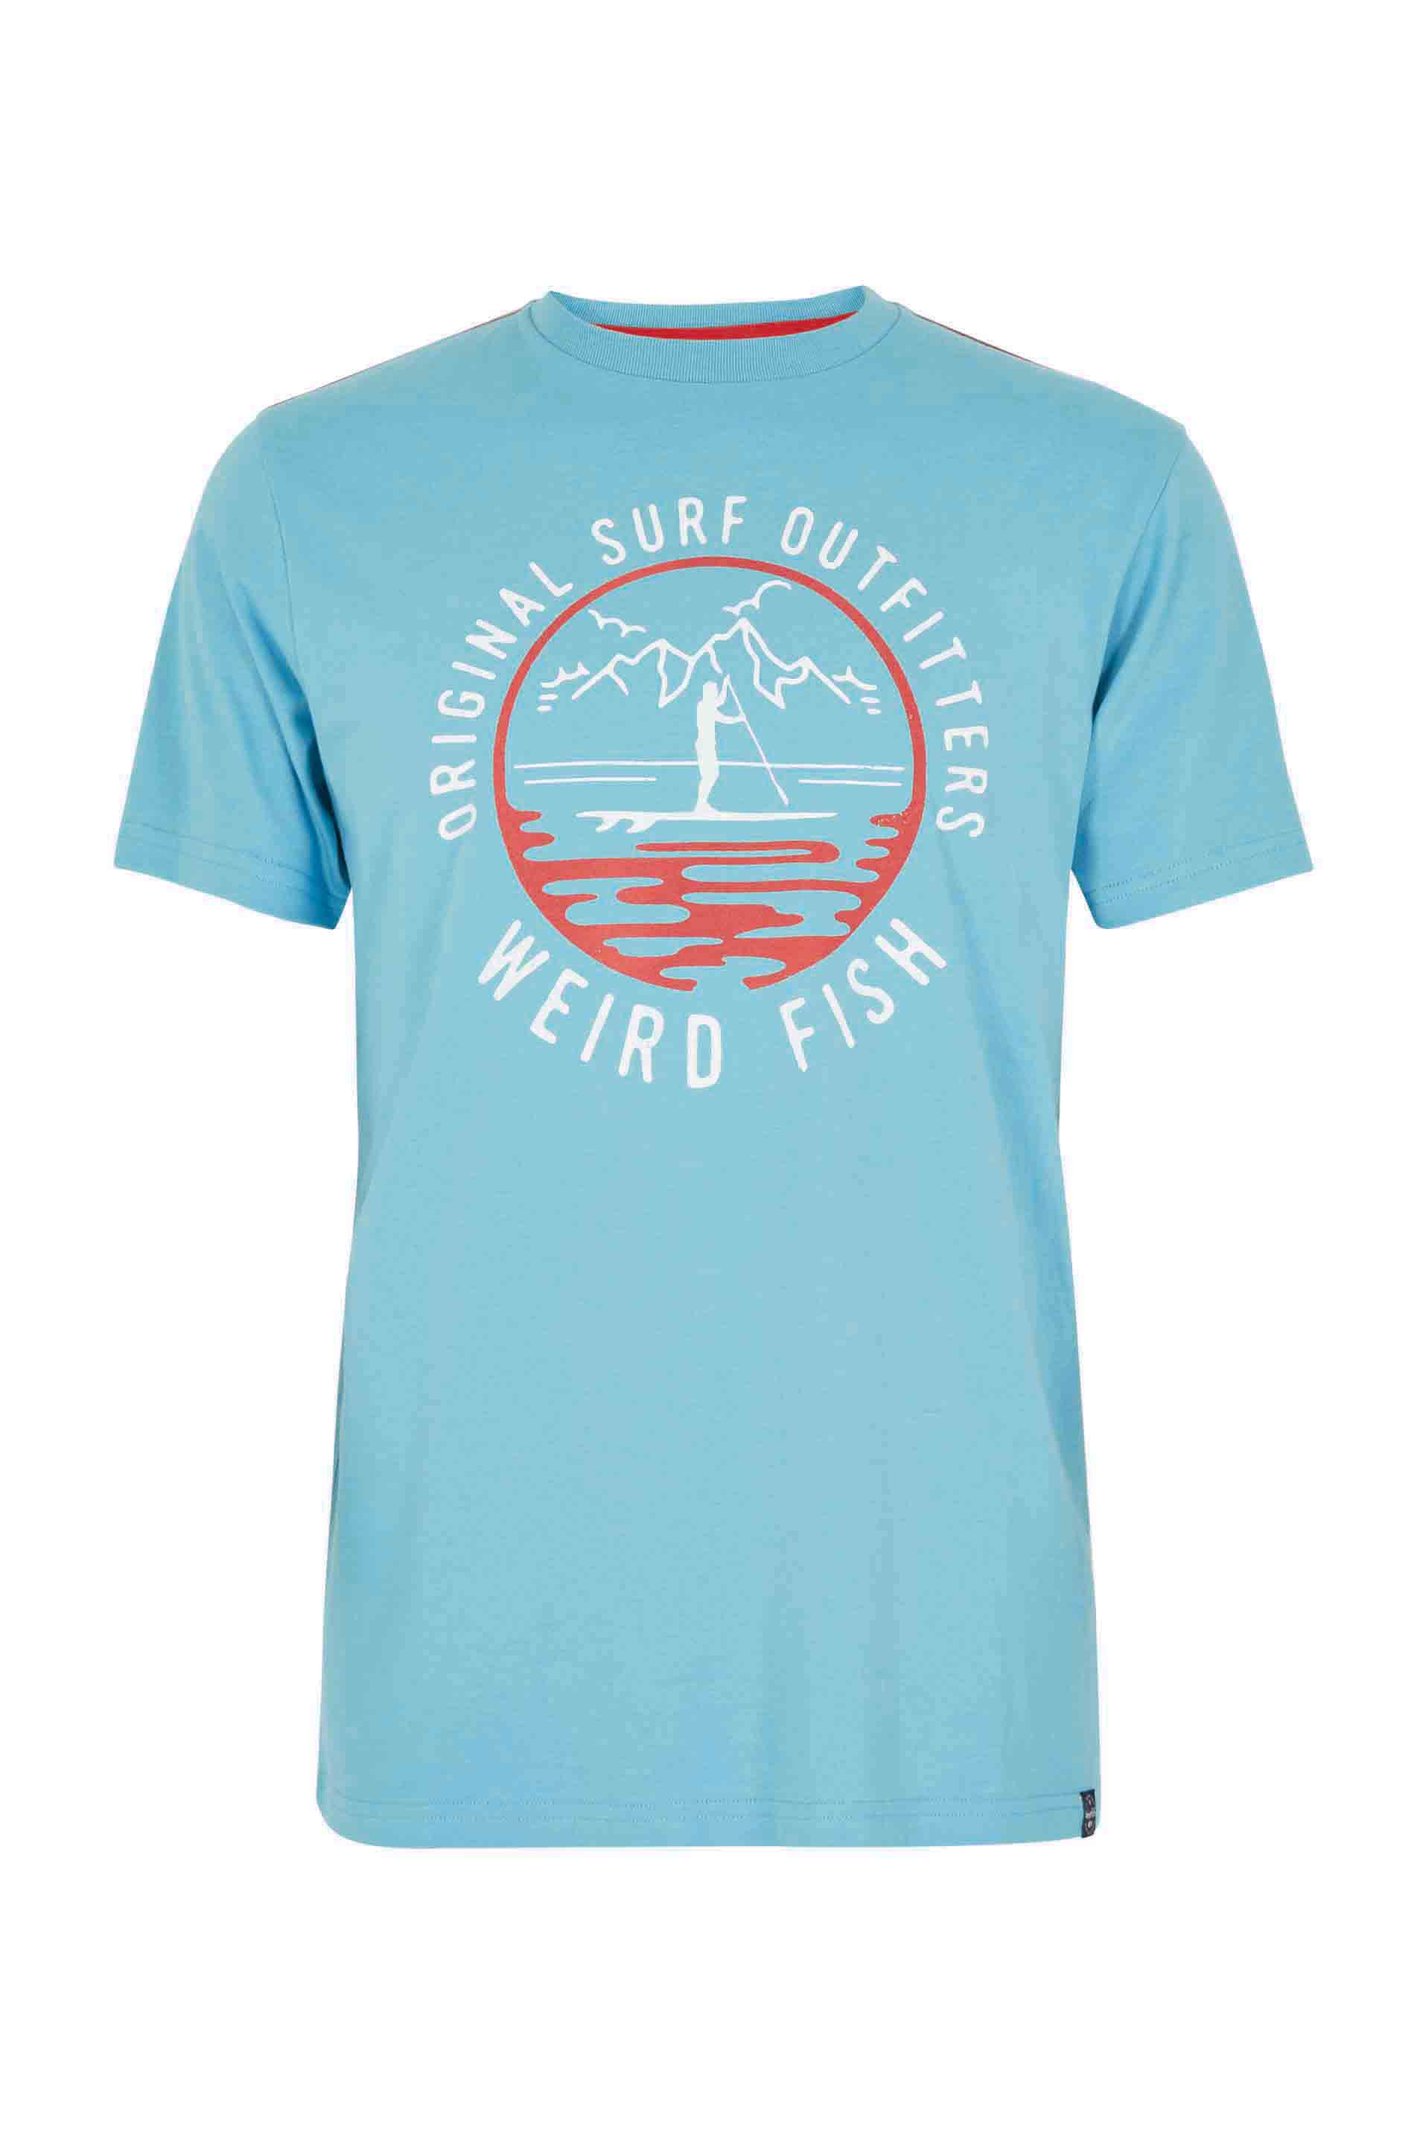 Weird Fish Paddle Eco Graphic T-Shirt Sky Blue Size 5XL